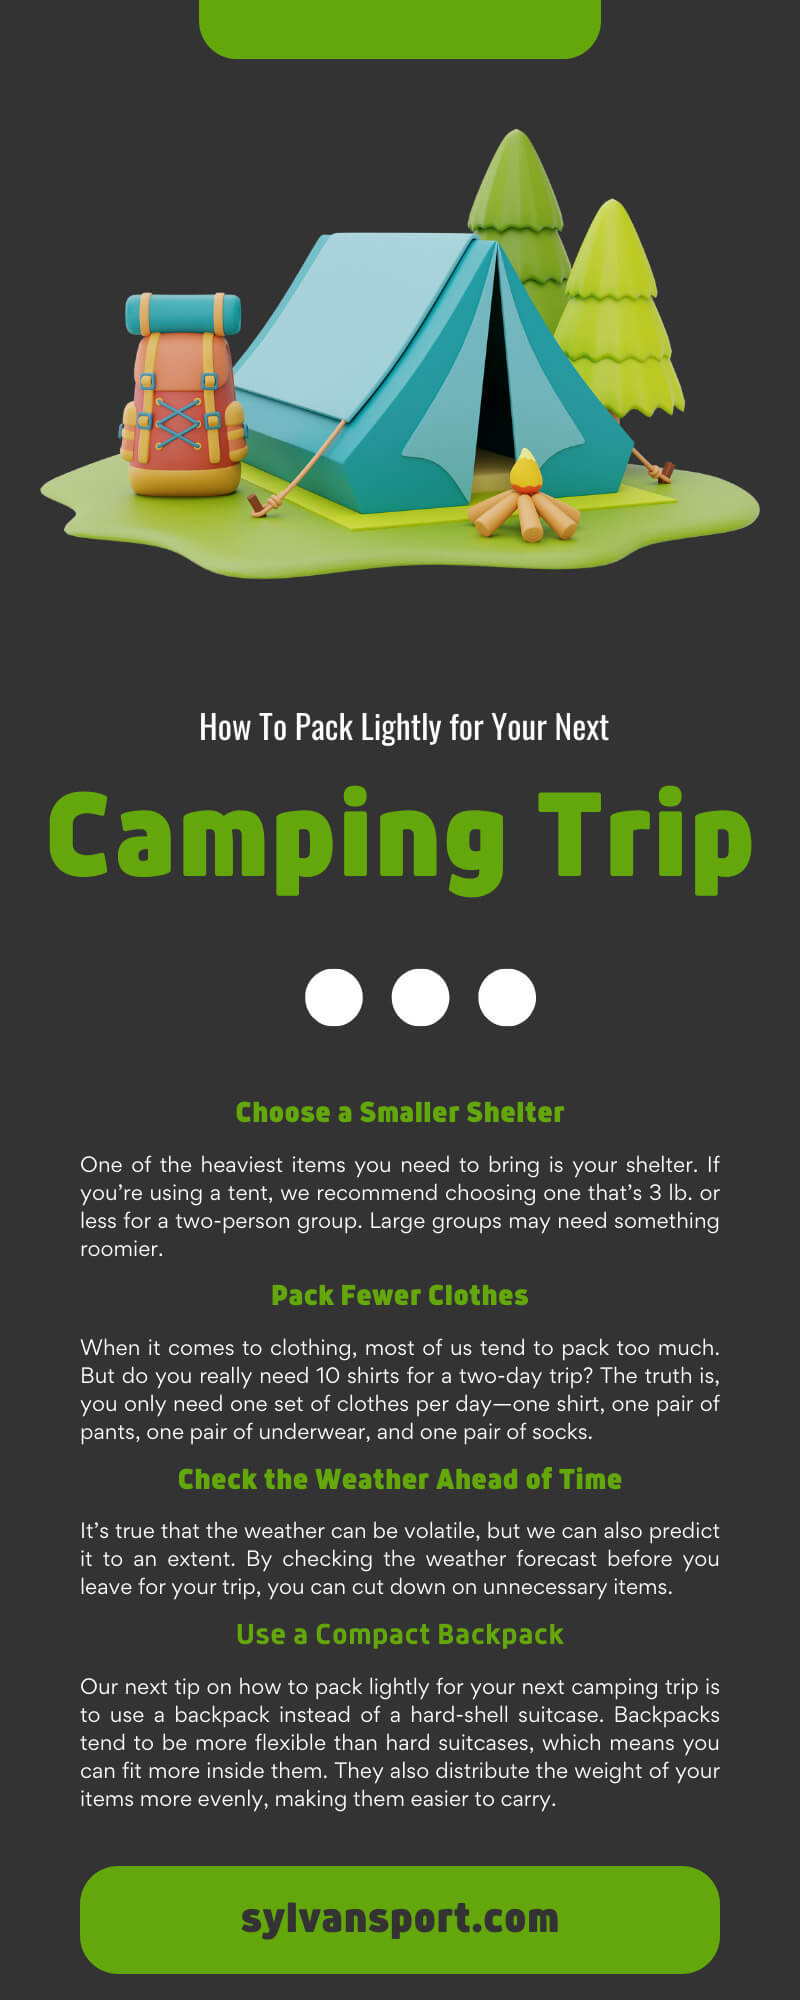 How To Pack Lightly for Your Next Camping Trip